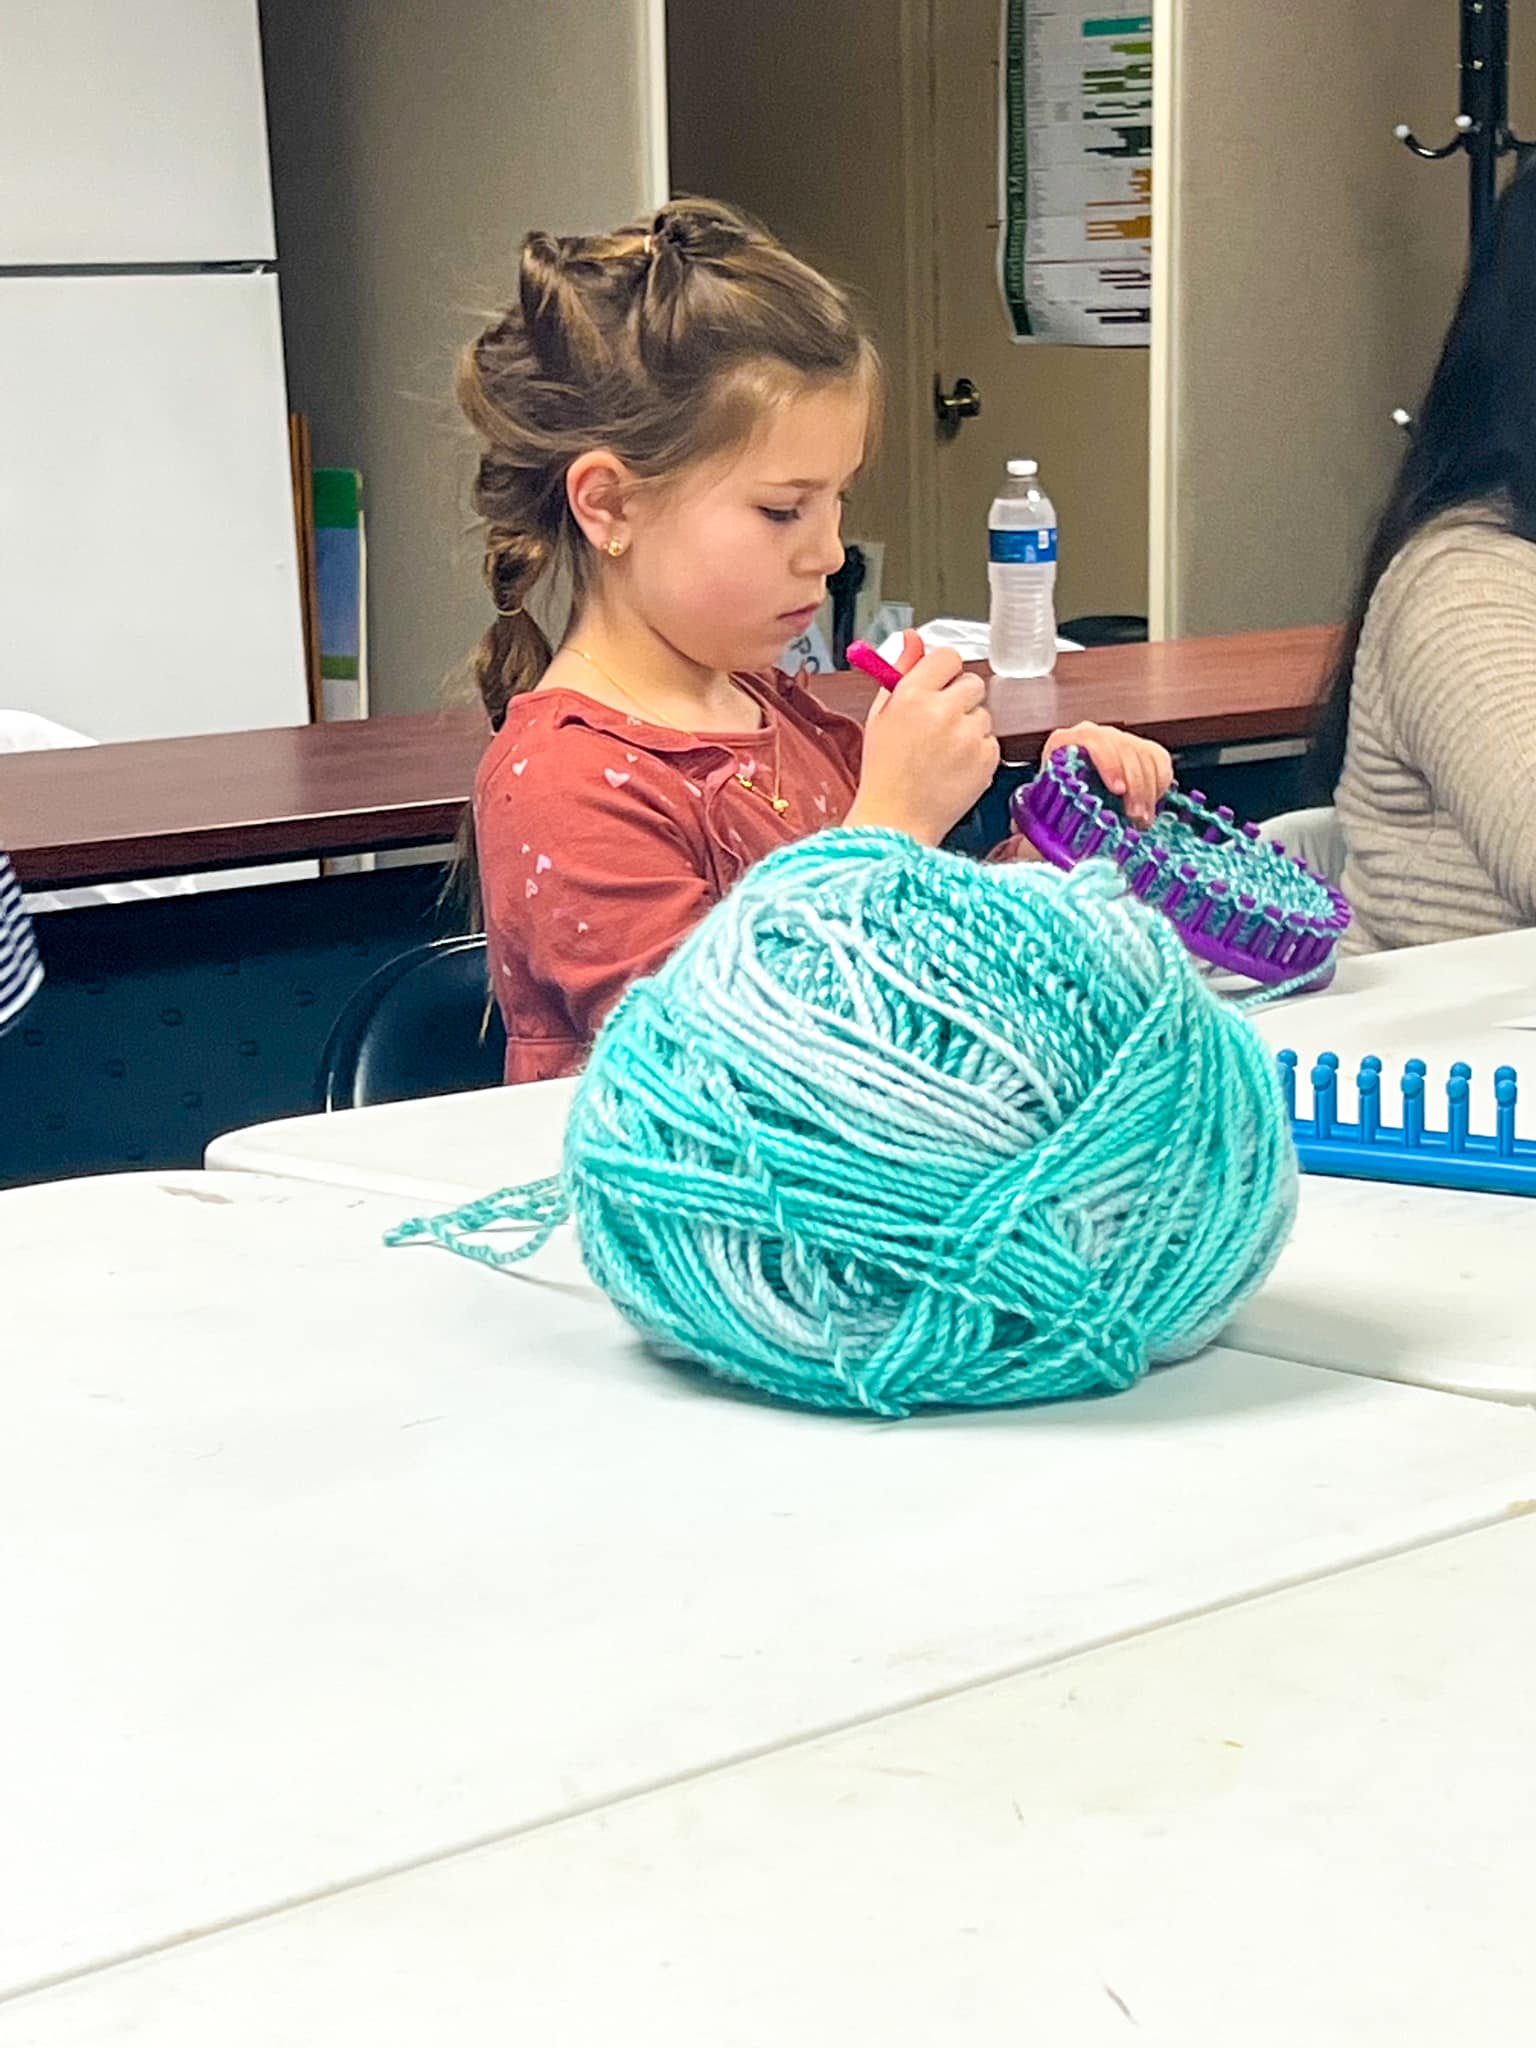 Full Focus: Participant is hard at work to create a loom knitted hat. 